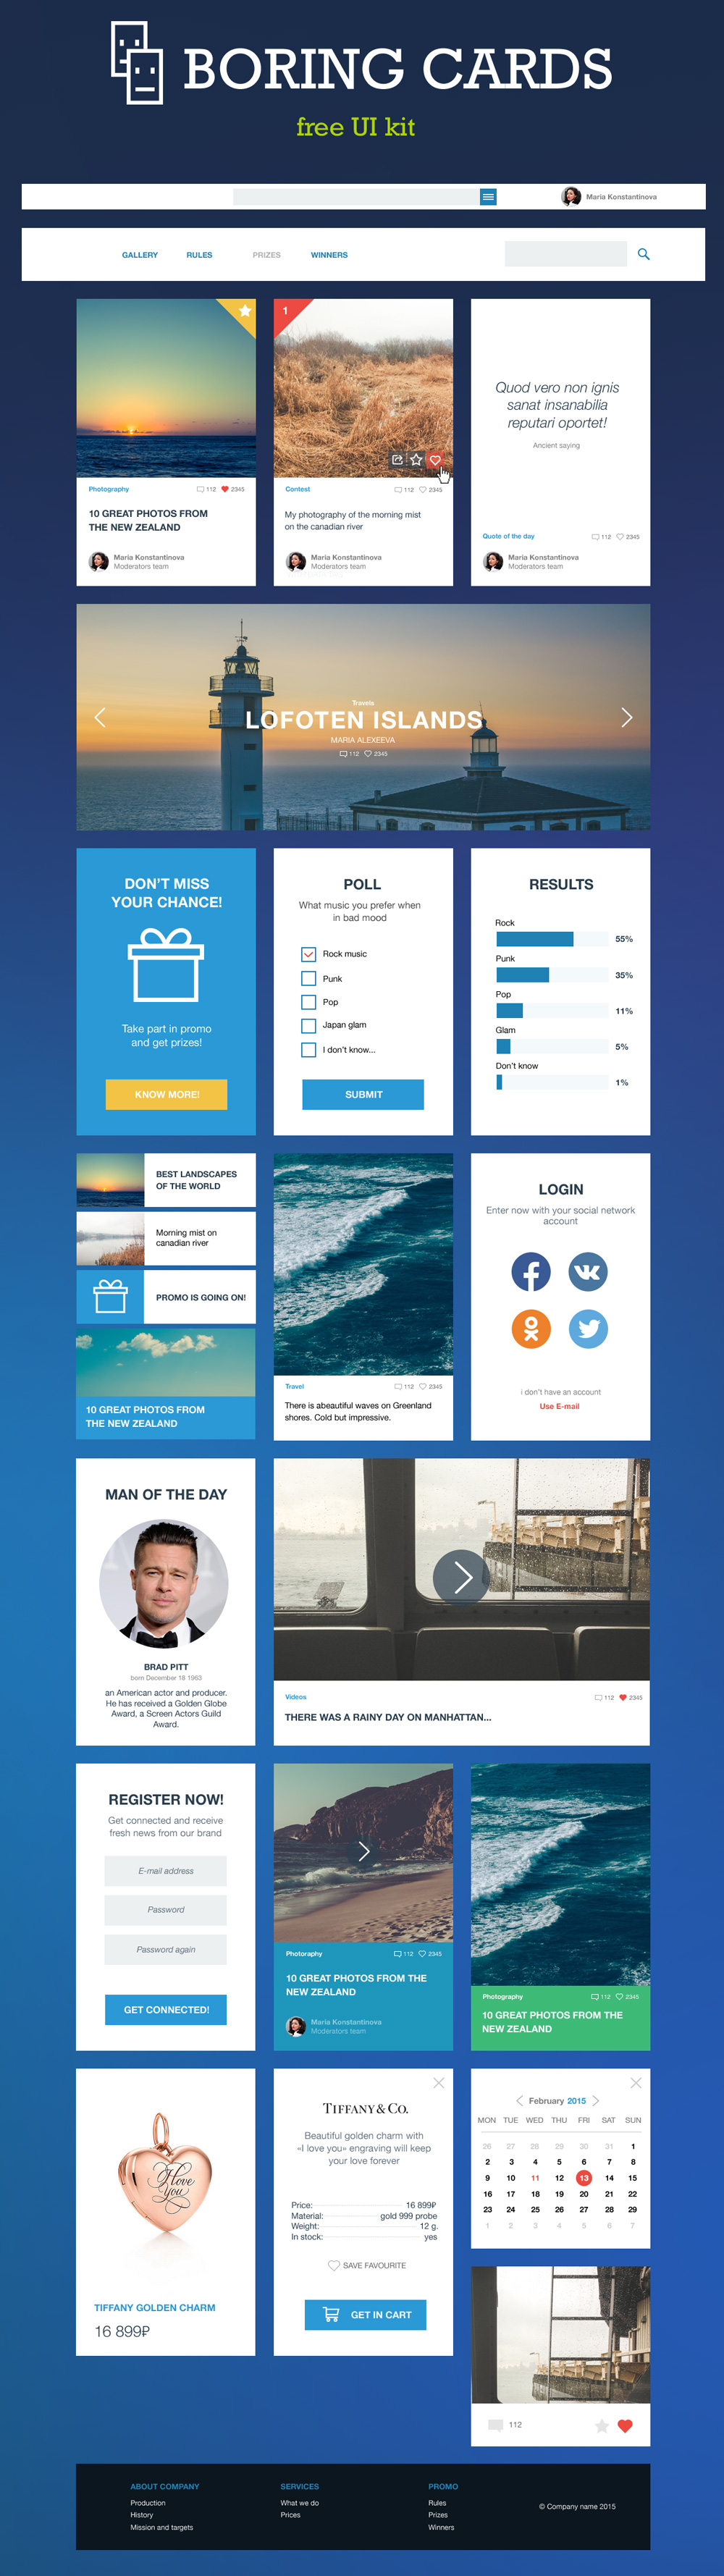 http://www.graphicsfuel.com/wp-content/uploads/2015/02/boring-cards-free-ui-kit.jpg